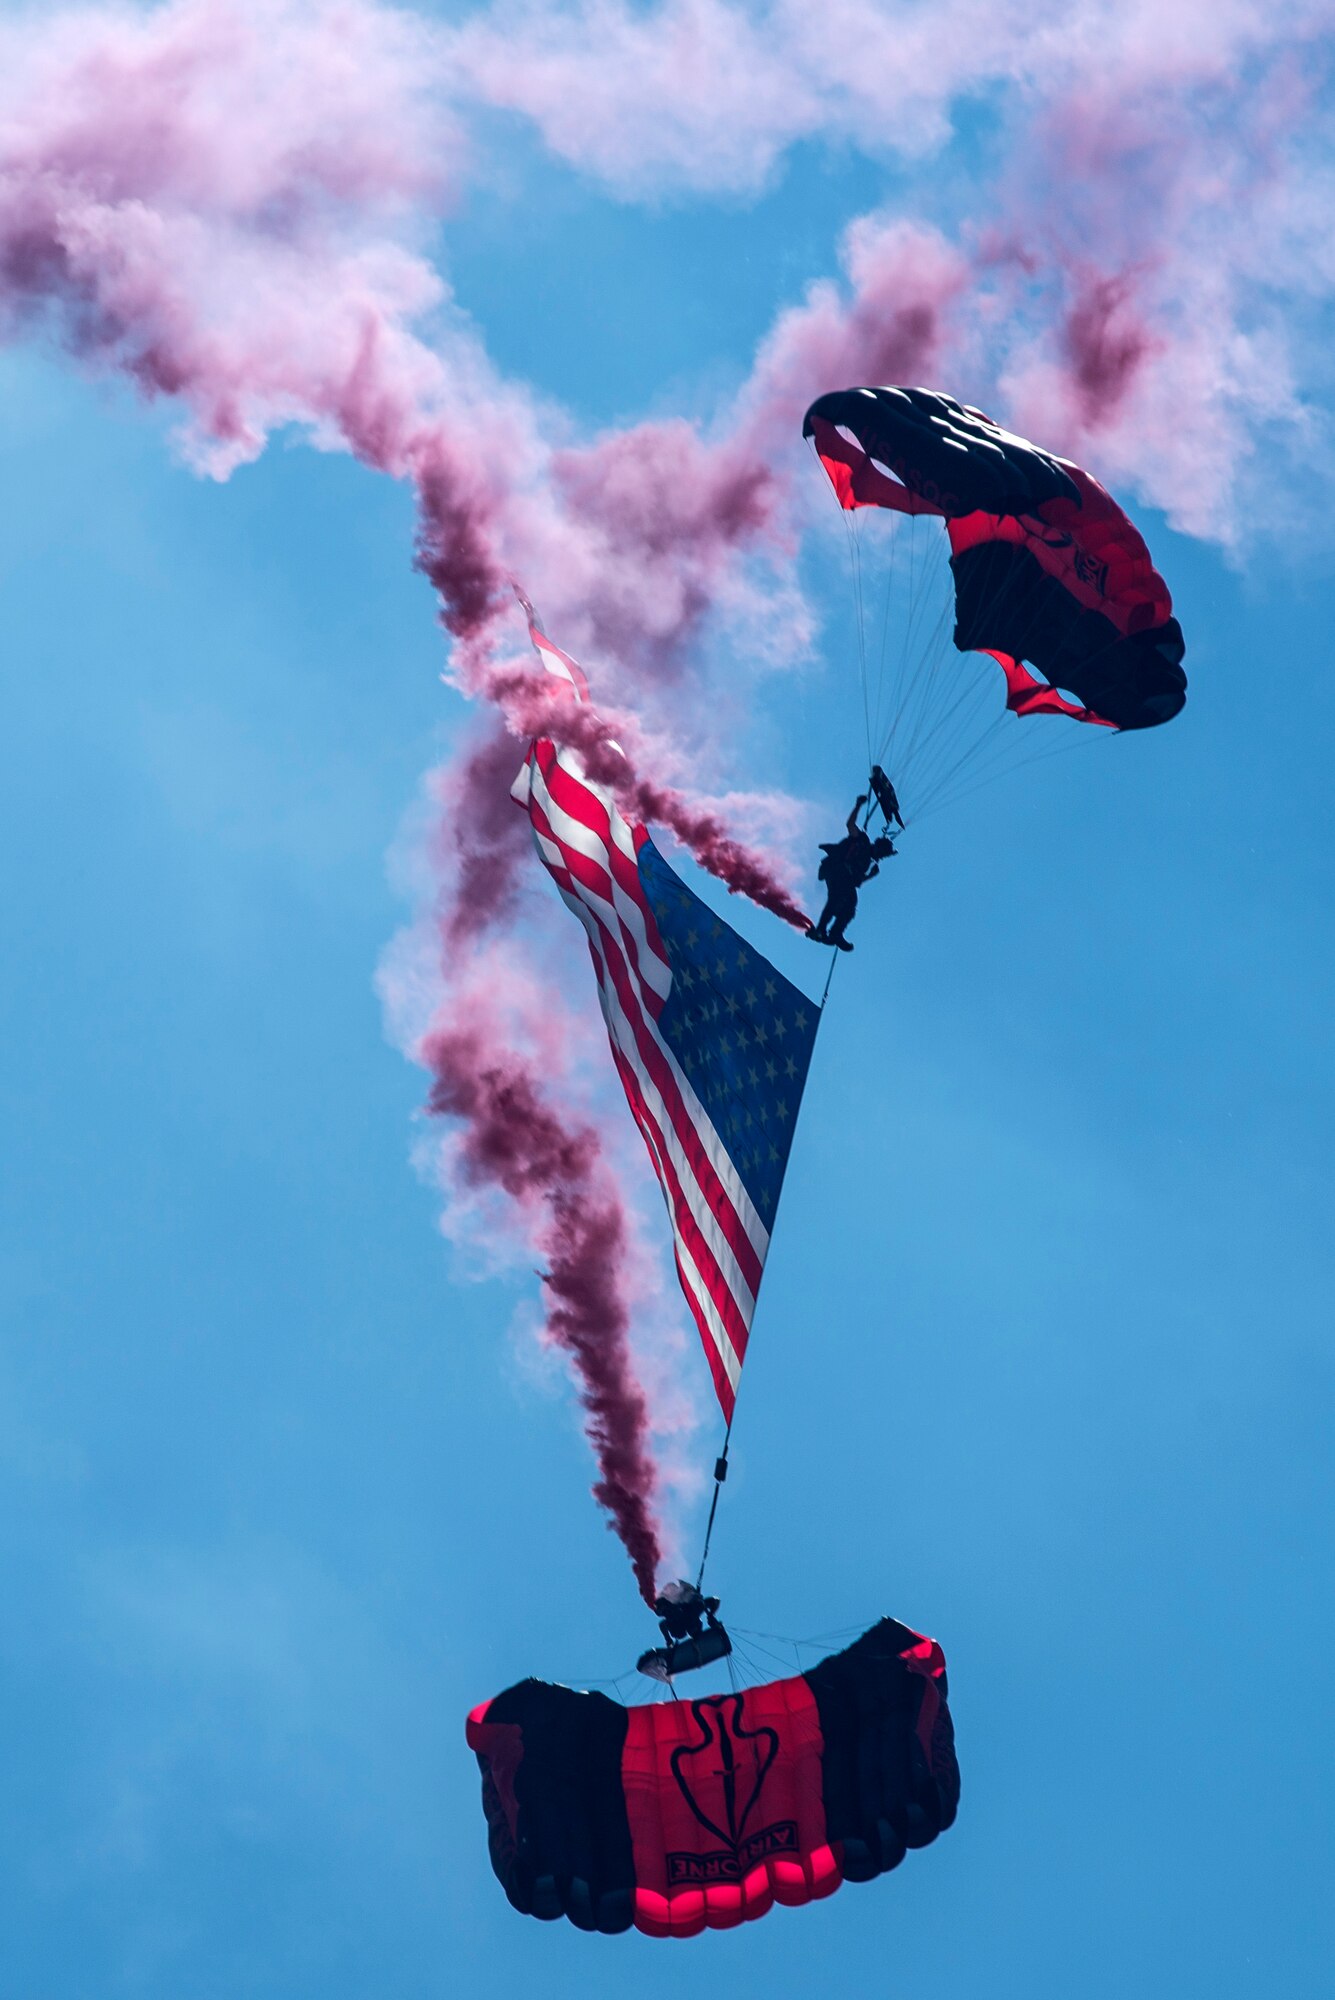 Members of the Black Daggers, the official U.S. Army Special Operations Command Parachute Demonstration Team, perform aerial stunts during Scott Air Force Base 2017 Air Show and Open House June 9, which celebrates the base’s 100th anniversary.  The black daggers use the military variant of the ram-air parachute, which is a flexible-wing glider.  This allows a free-fall parachutist the ability to jump with more than 100 pounds of additional equipment.(U.S. Air Force photo/Senior Airman Tristin English)